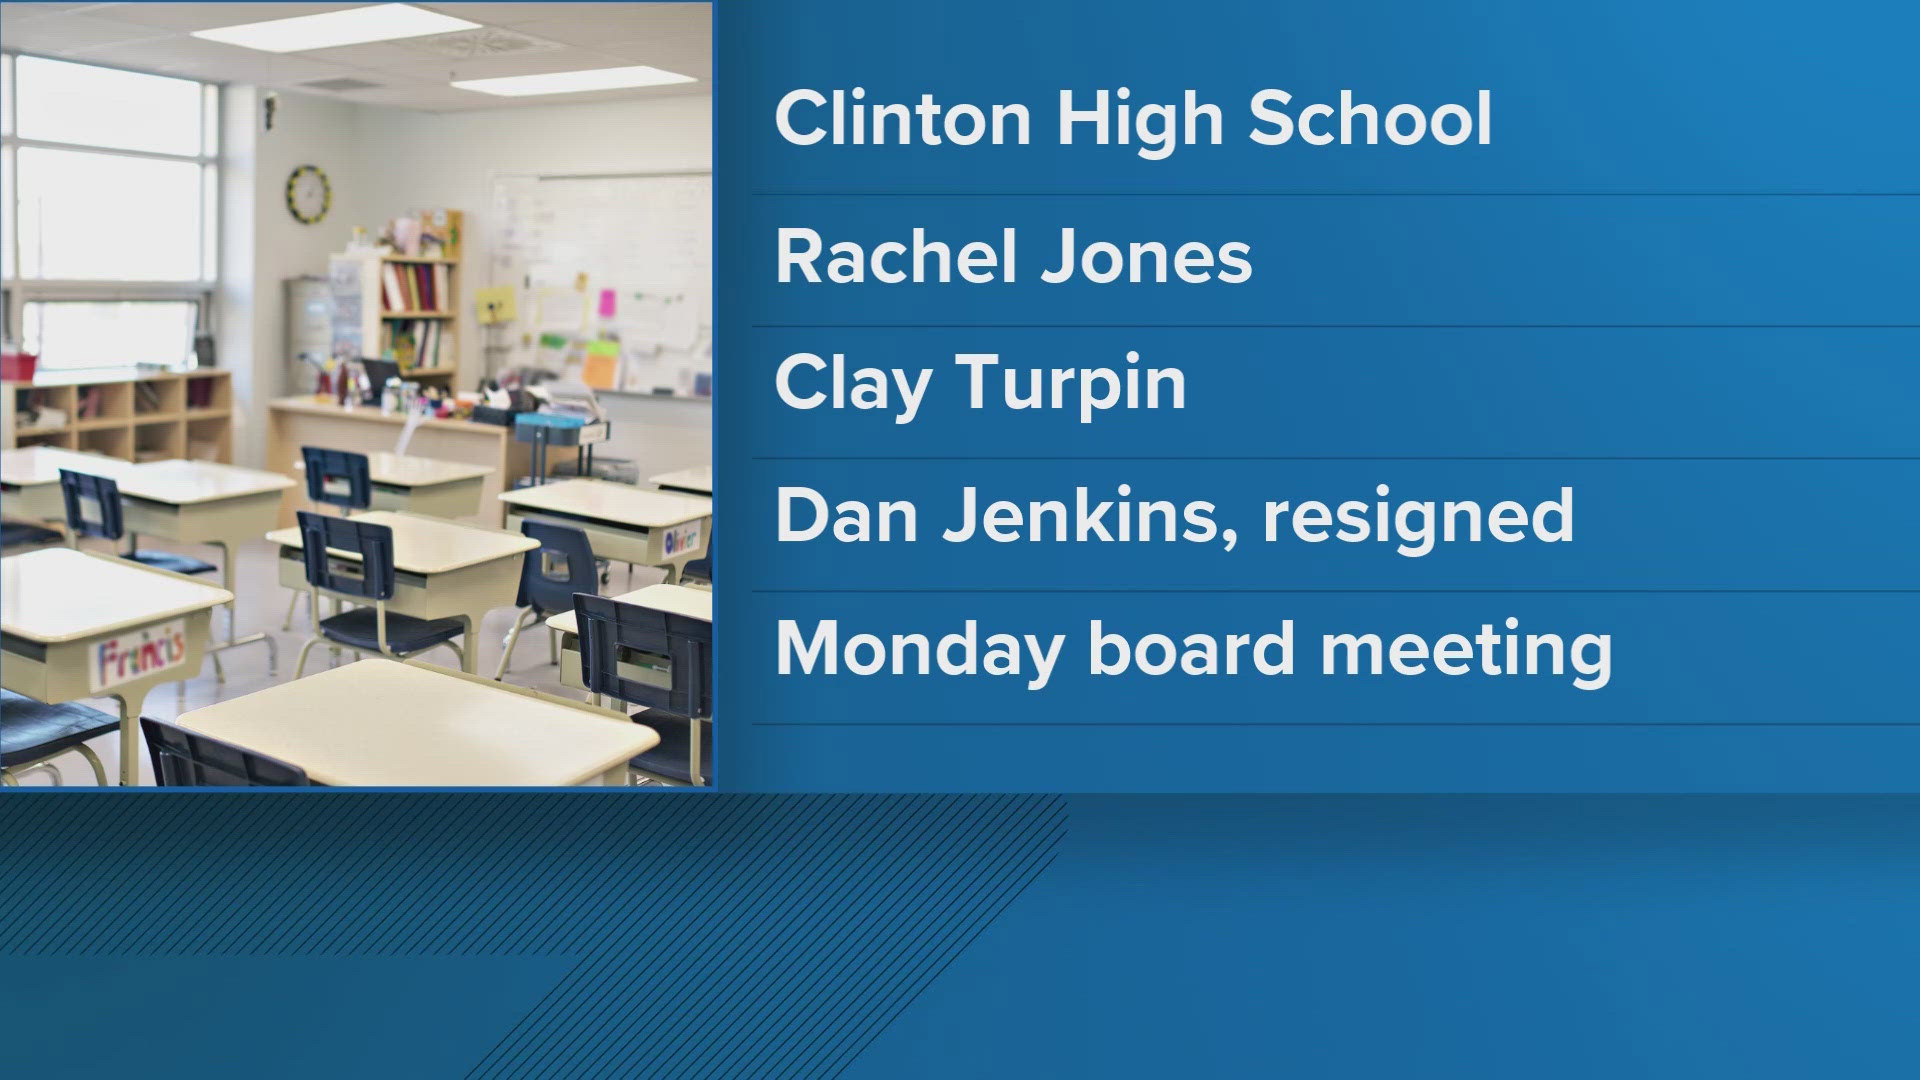 The Anderson County Board of Education unanimously voted to fire Rachel Jones and Clay Turpin at a meeting Monday night.